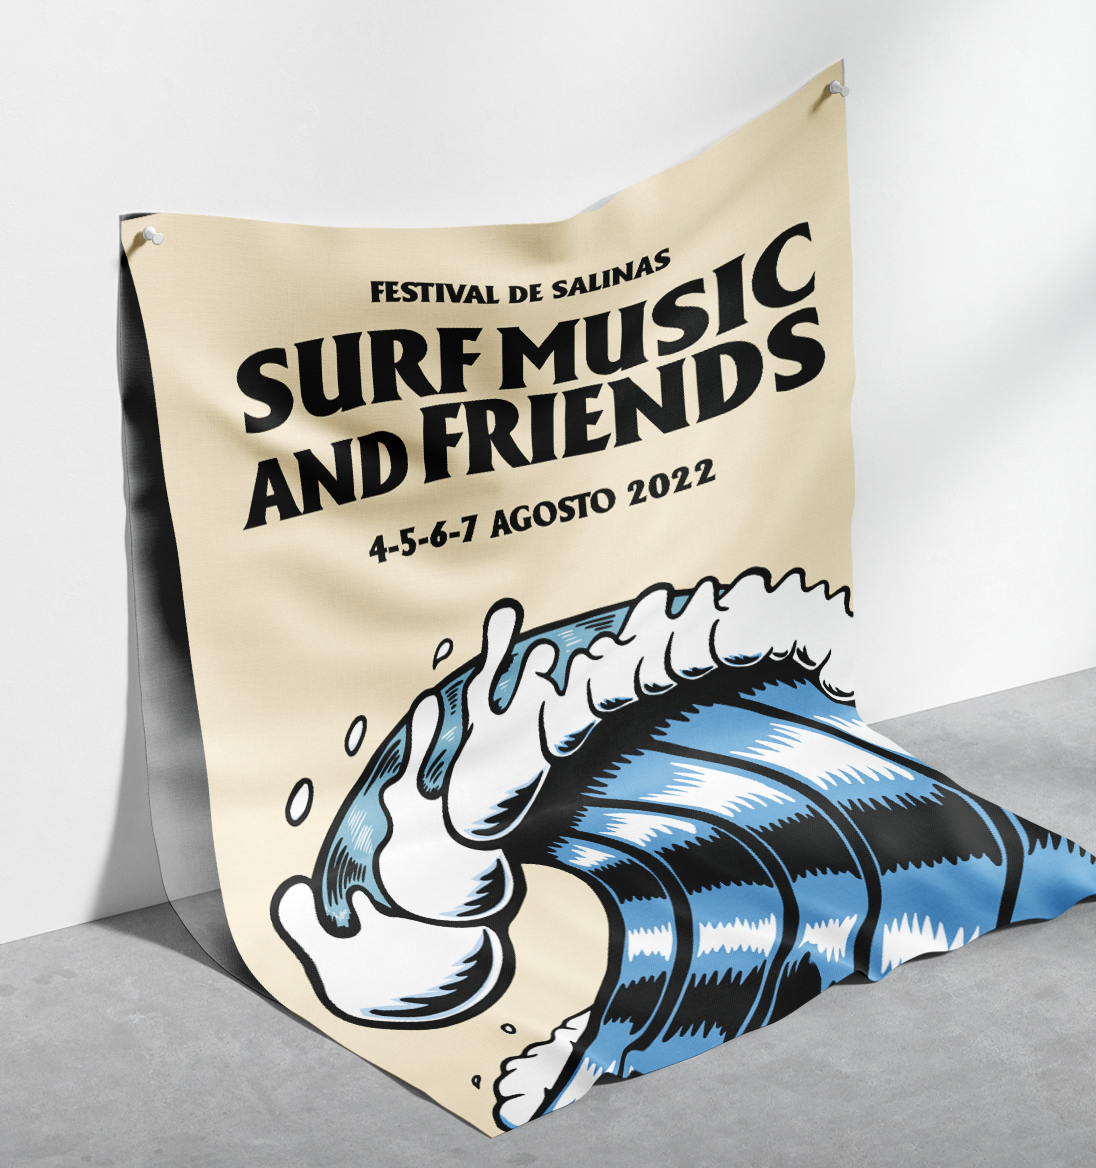 Surf music and friends festival